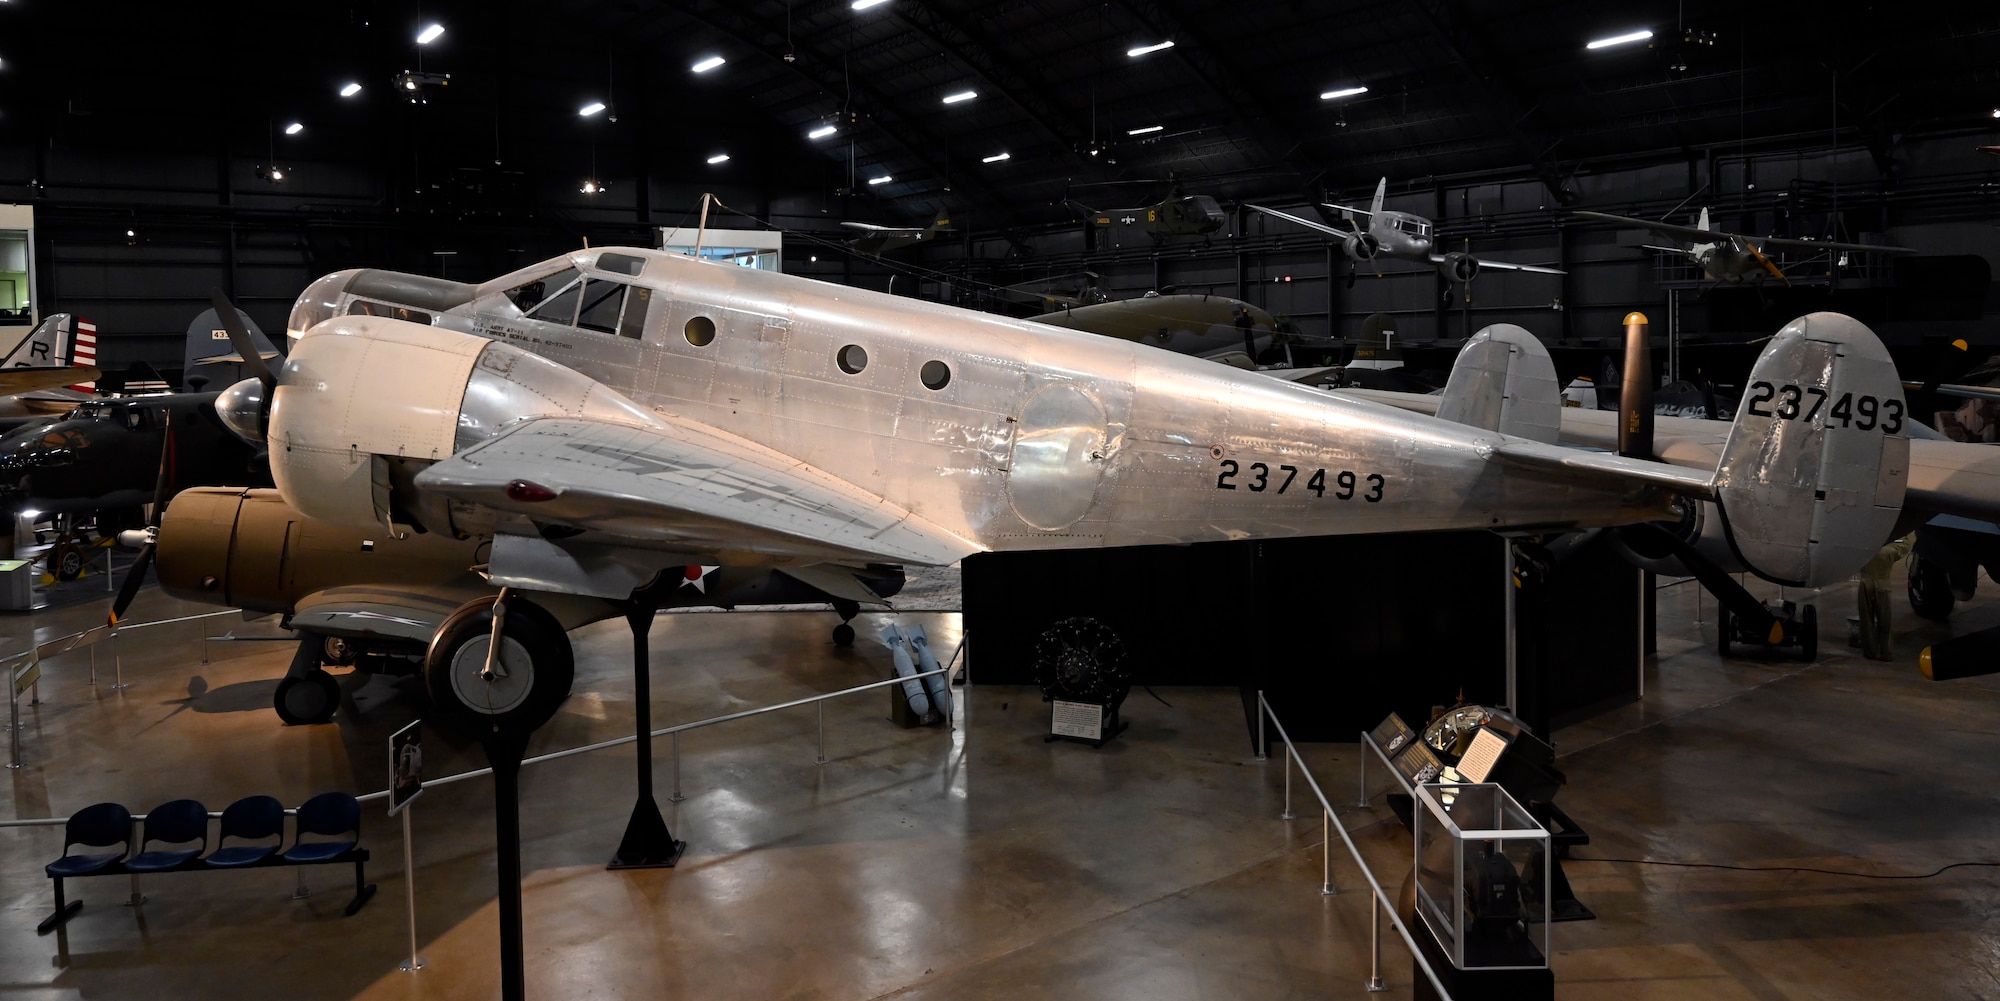 Beech AT-11 Kansan in the World War II Gallery at the National Museum of the United States Air Force.